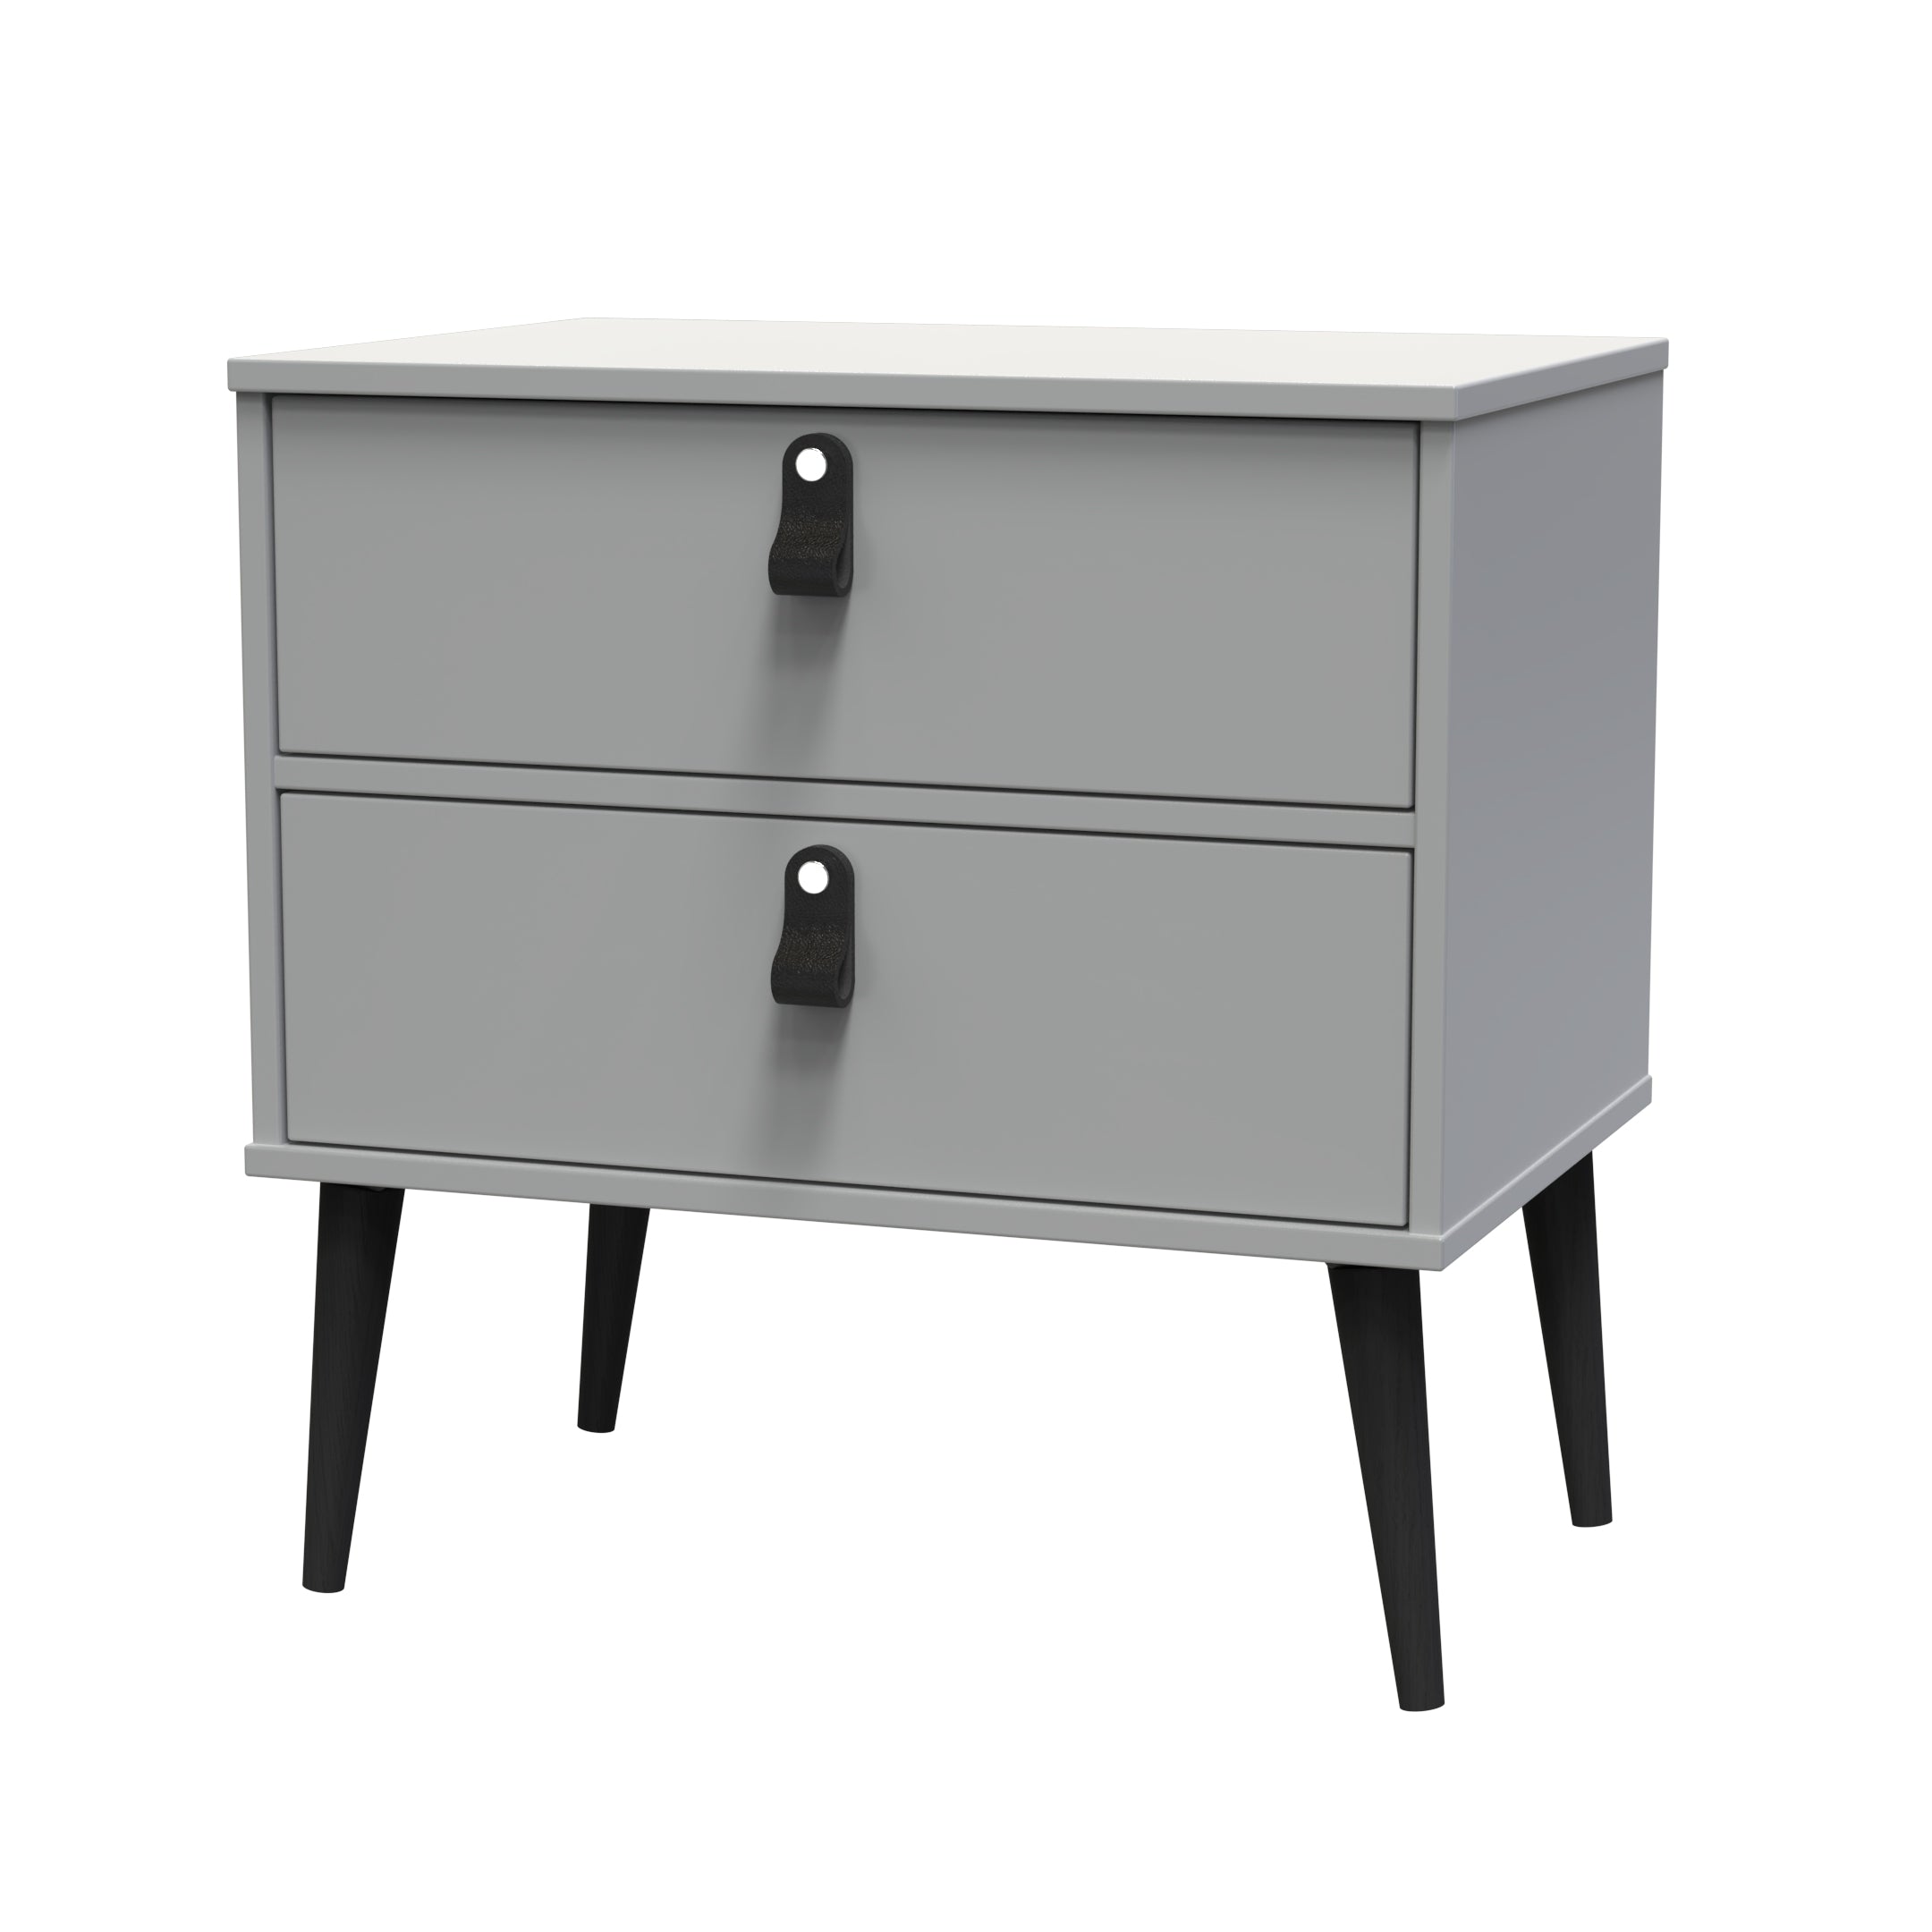 Dublin Ready Assembled Bedside Table with 2 Drawers  - Dusk Grey - Lewis’s Home  | TJ Hughes